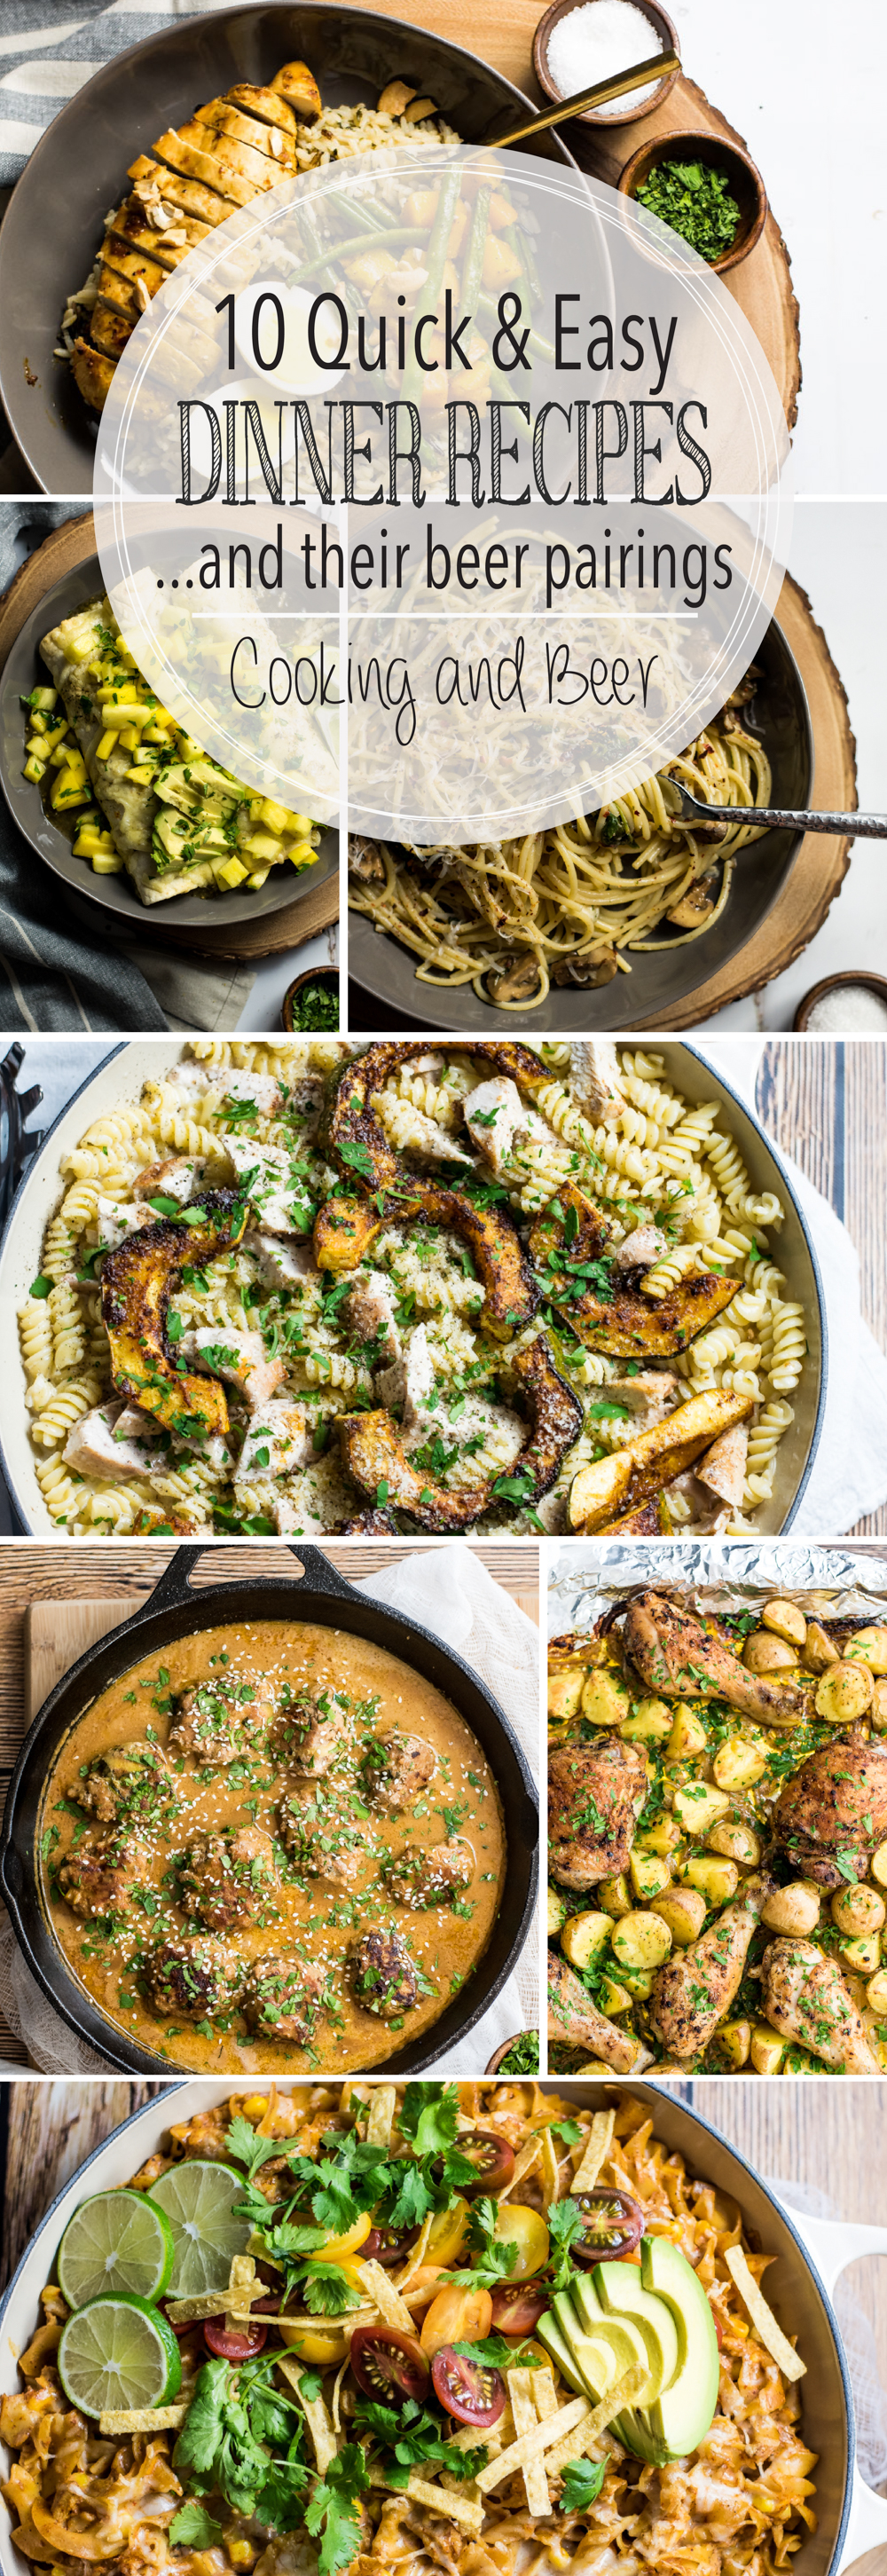 From 30-minute pasta dishes to tropical enchiladas and from one-pan chicken dishes to simple turkey meatballs, here are 10 Quick and Easy Dinner Recipes.